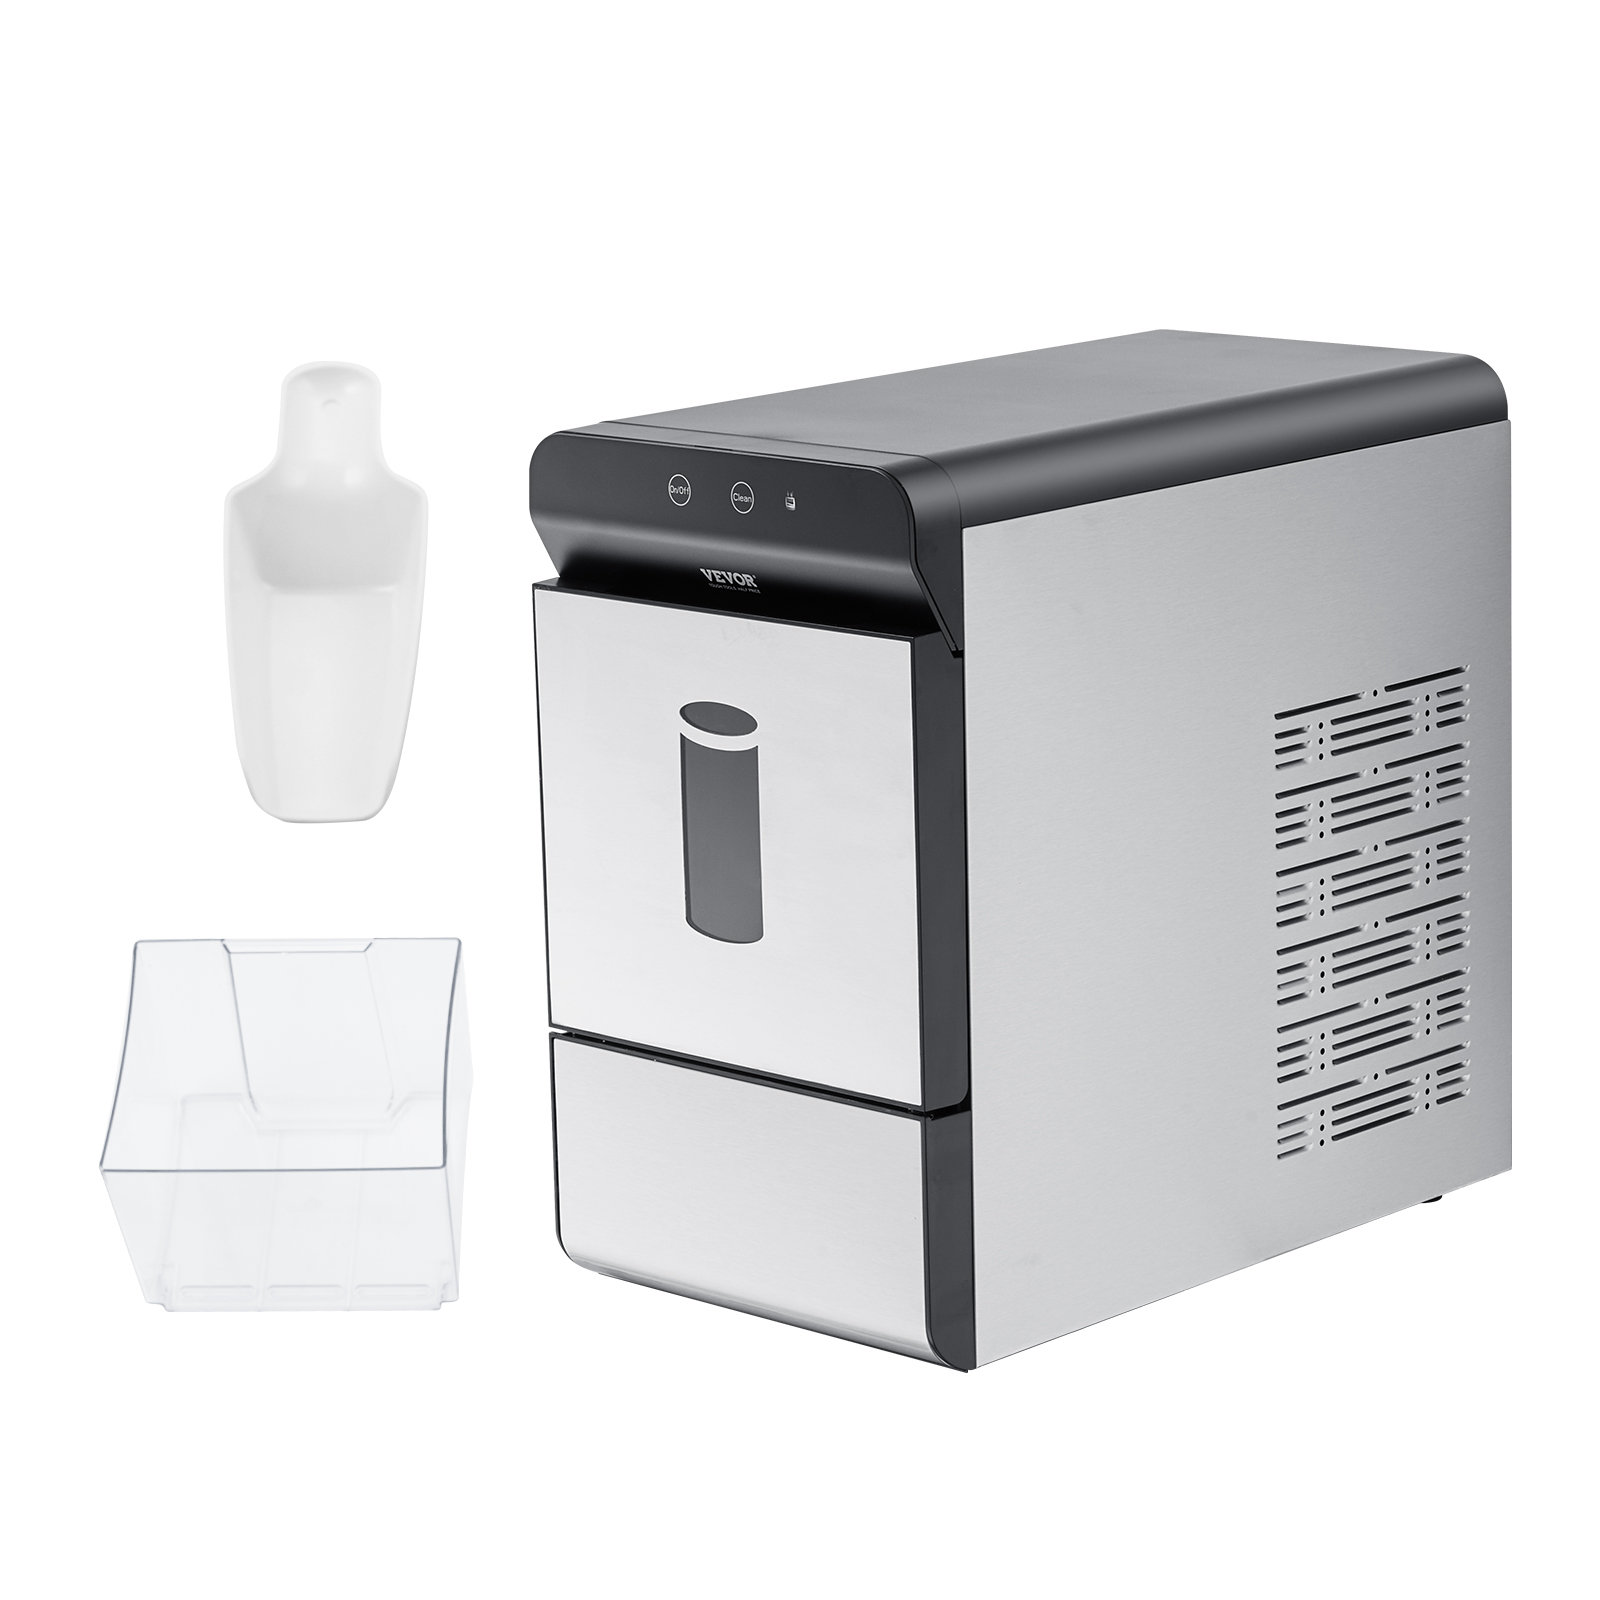 Produce a Basket in 1.5 Hour, Self-Cleaning, One-Click Design, Compact Ice  Maker Nugget with